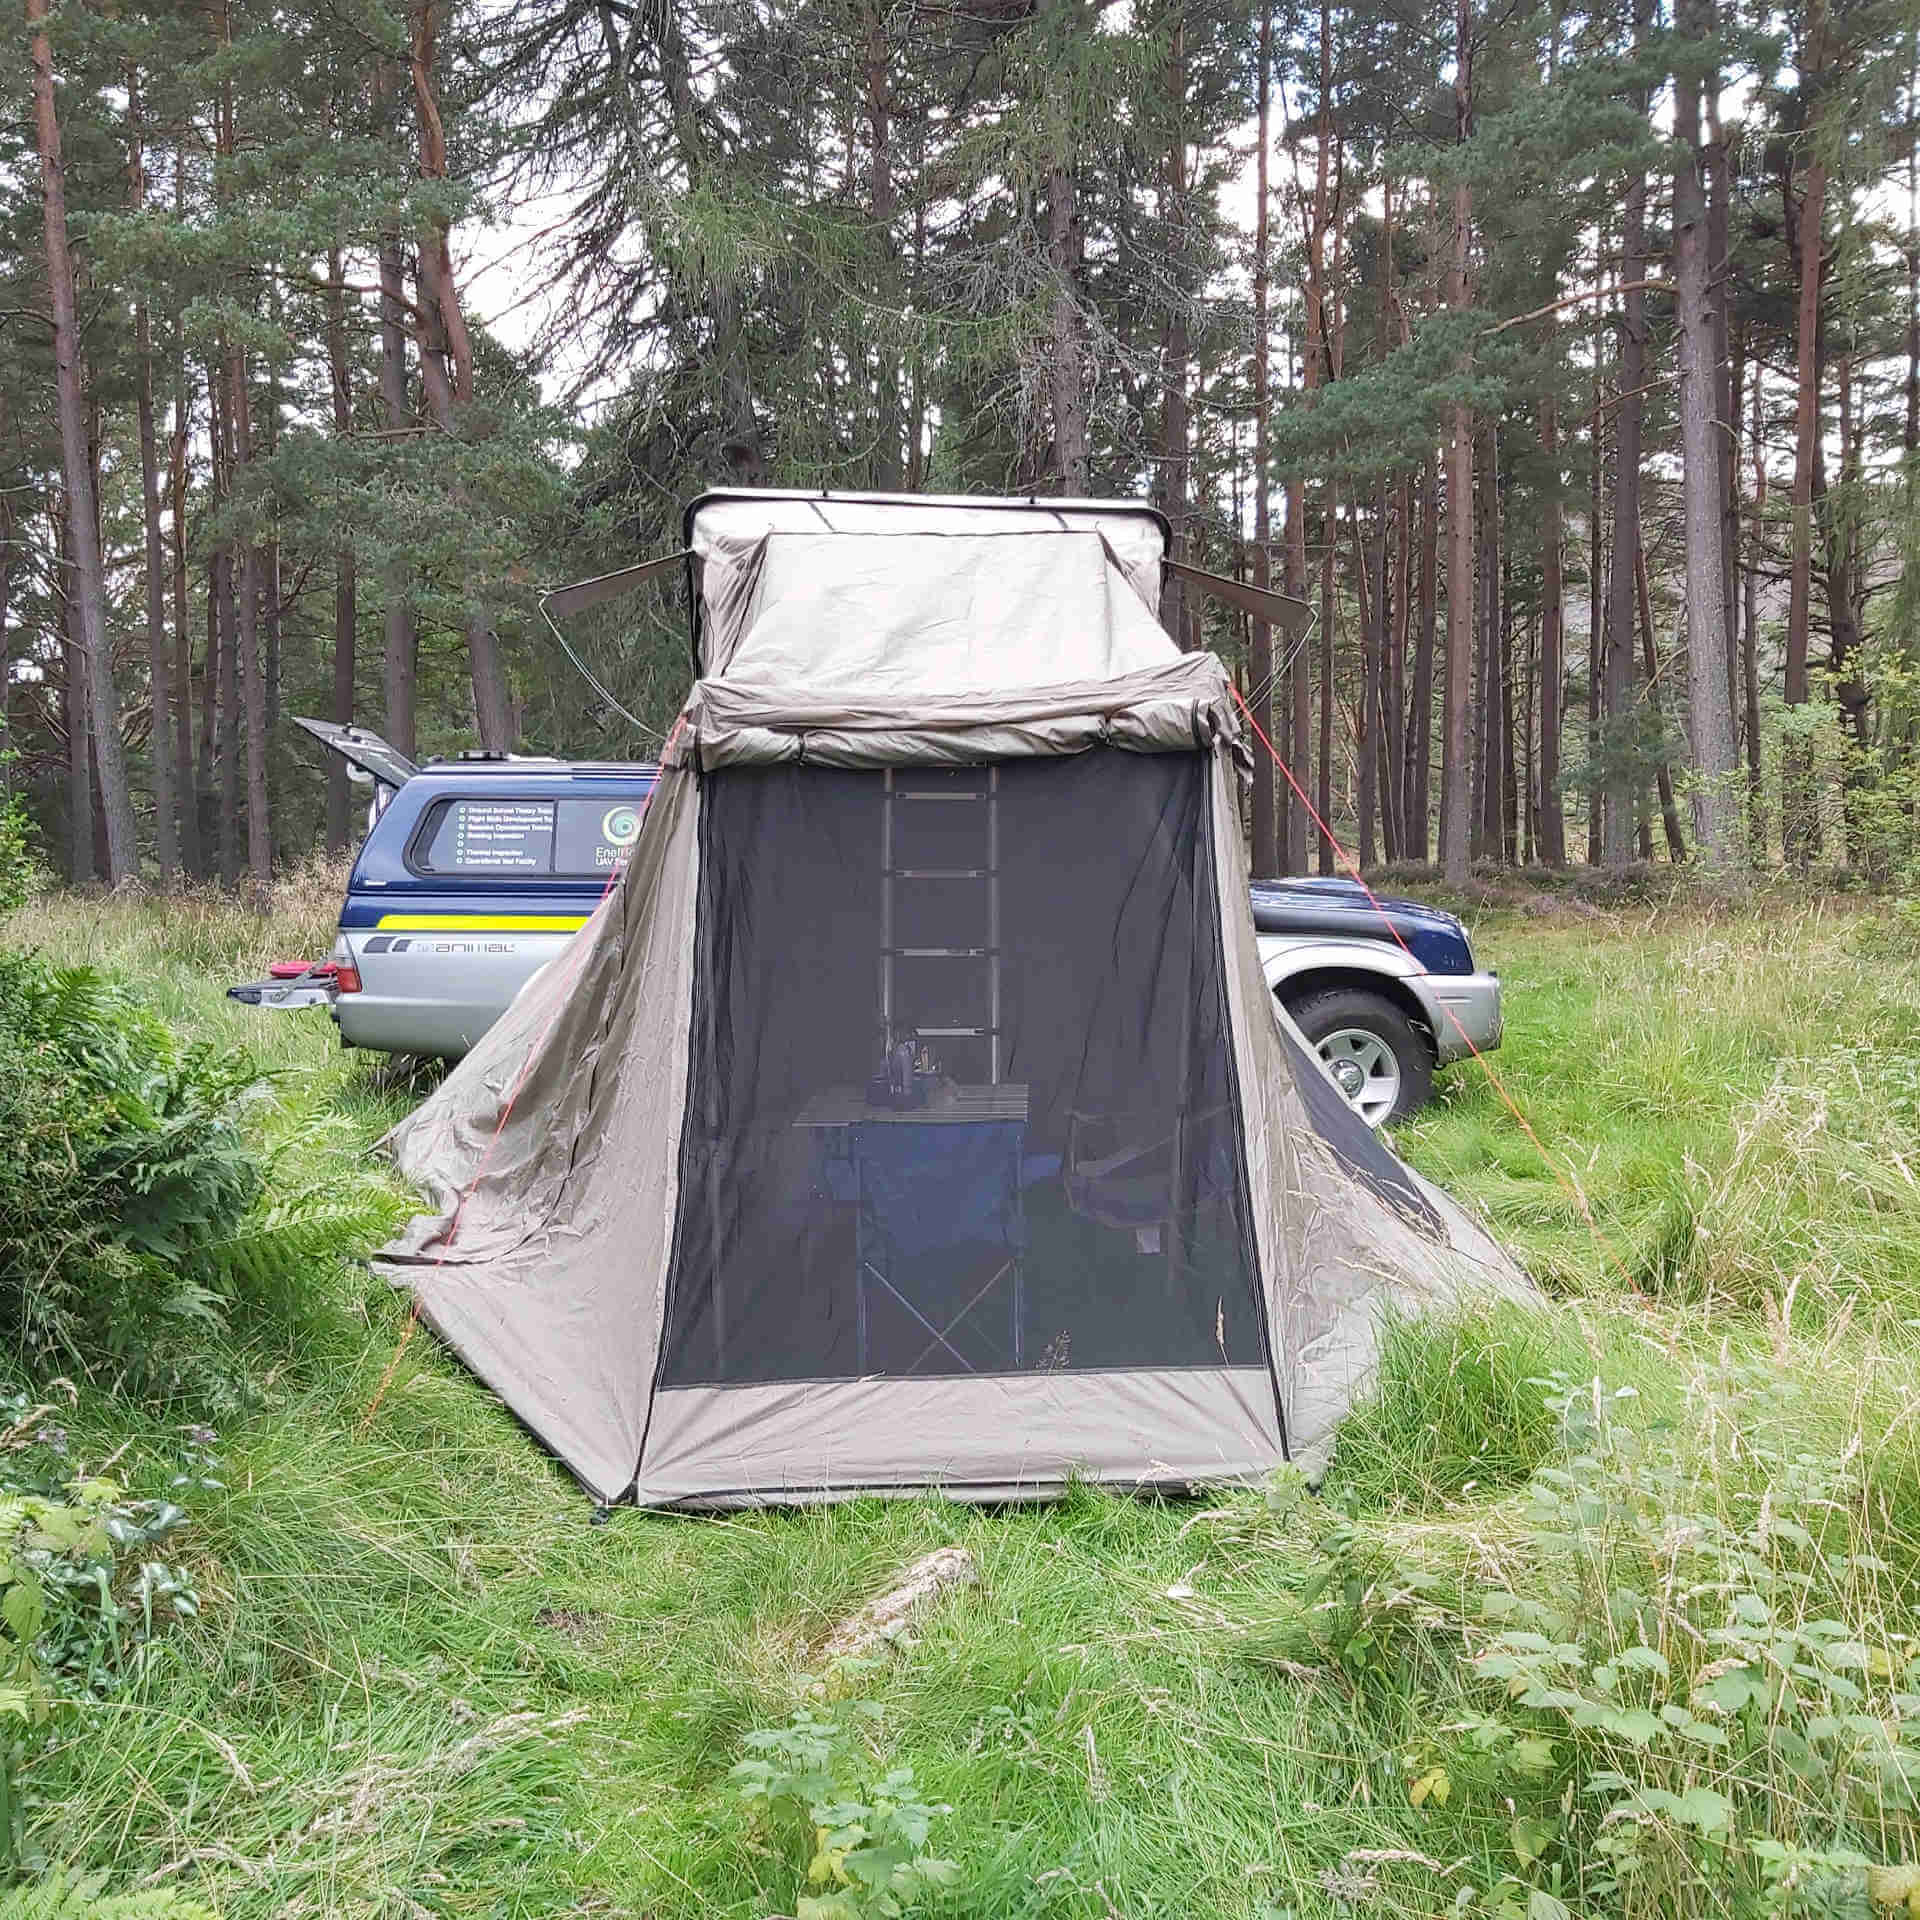 Annex Addon for the Direct4x4 RoofTrekk 4 Person Roof Top Camping Tent in Grey -  - sold by Direct4x4